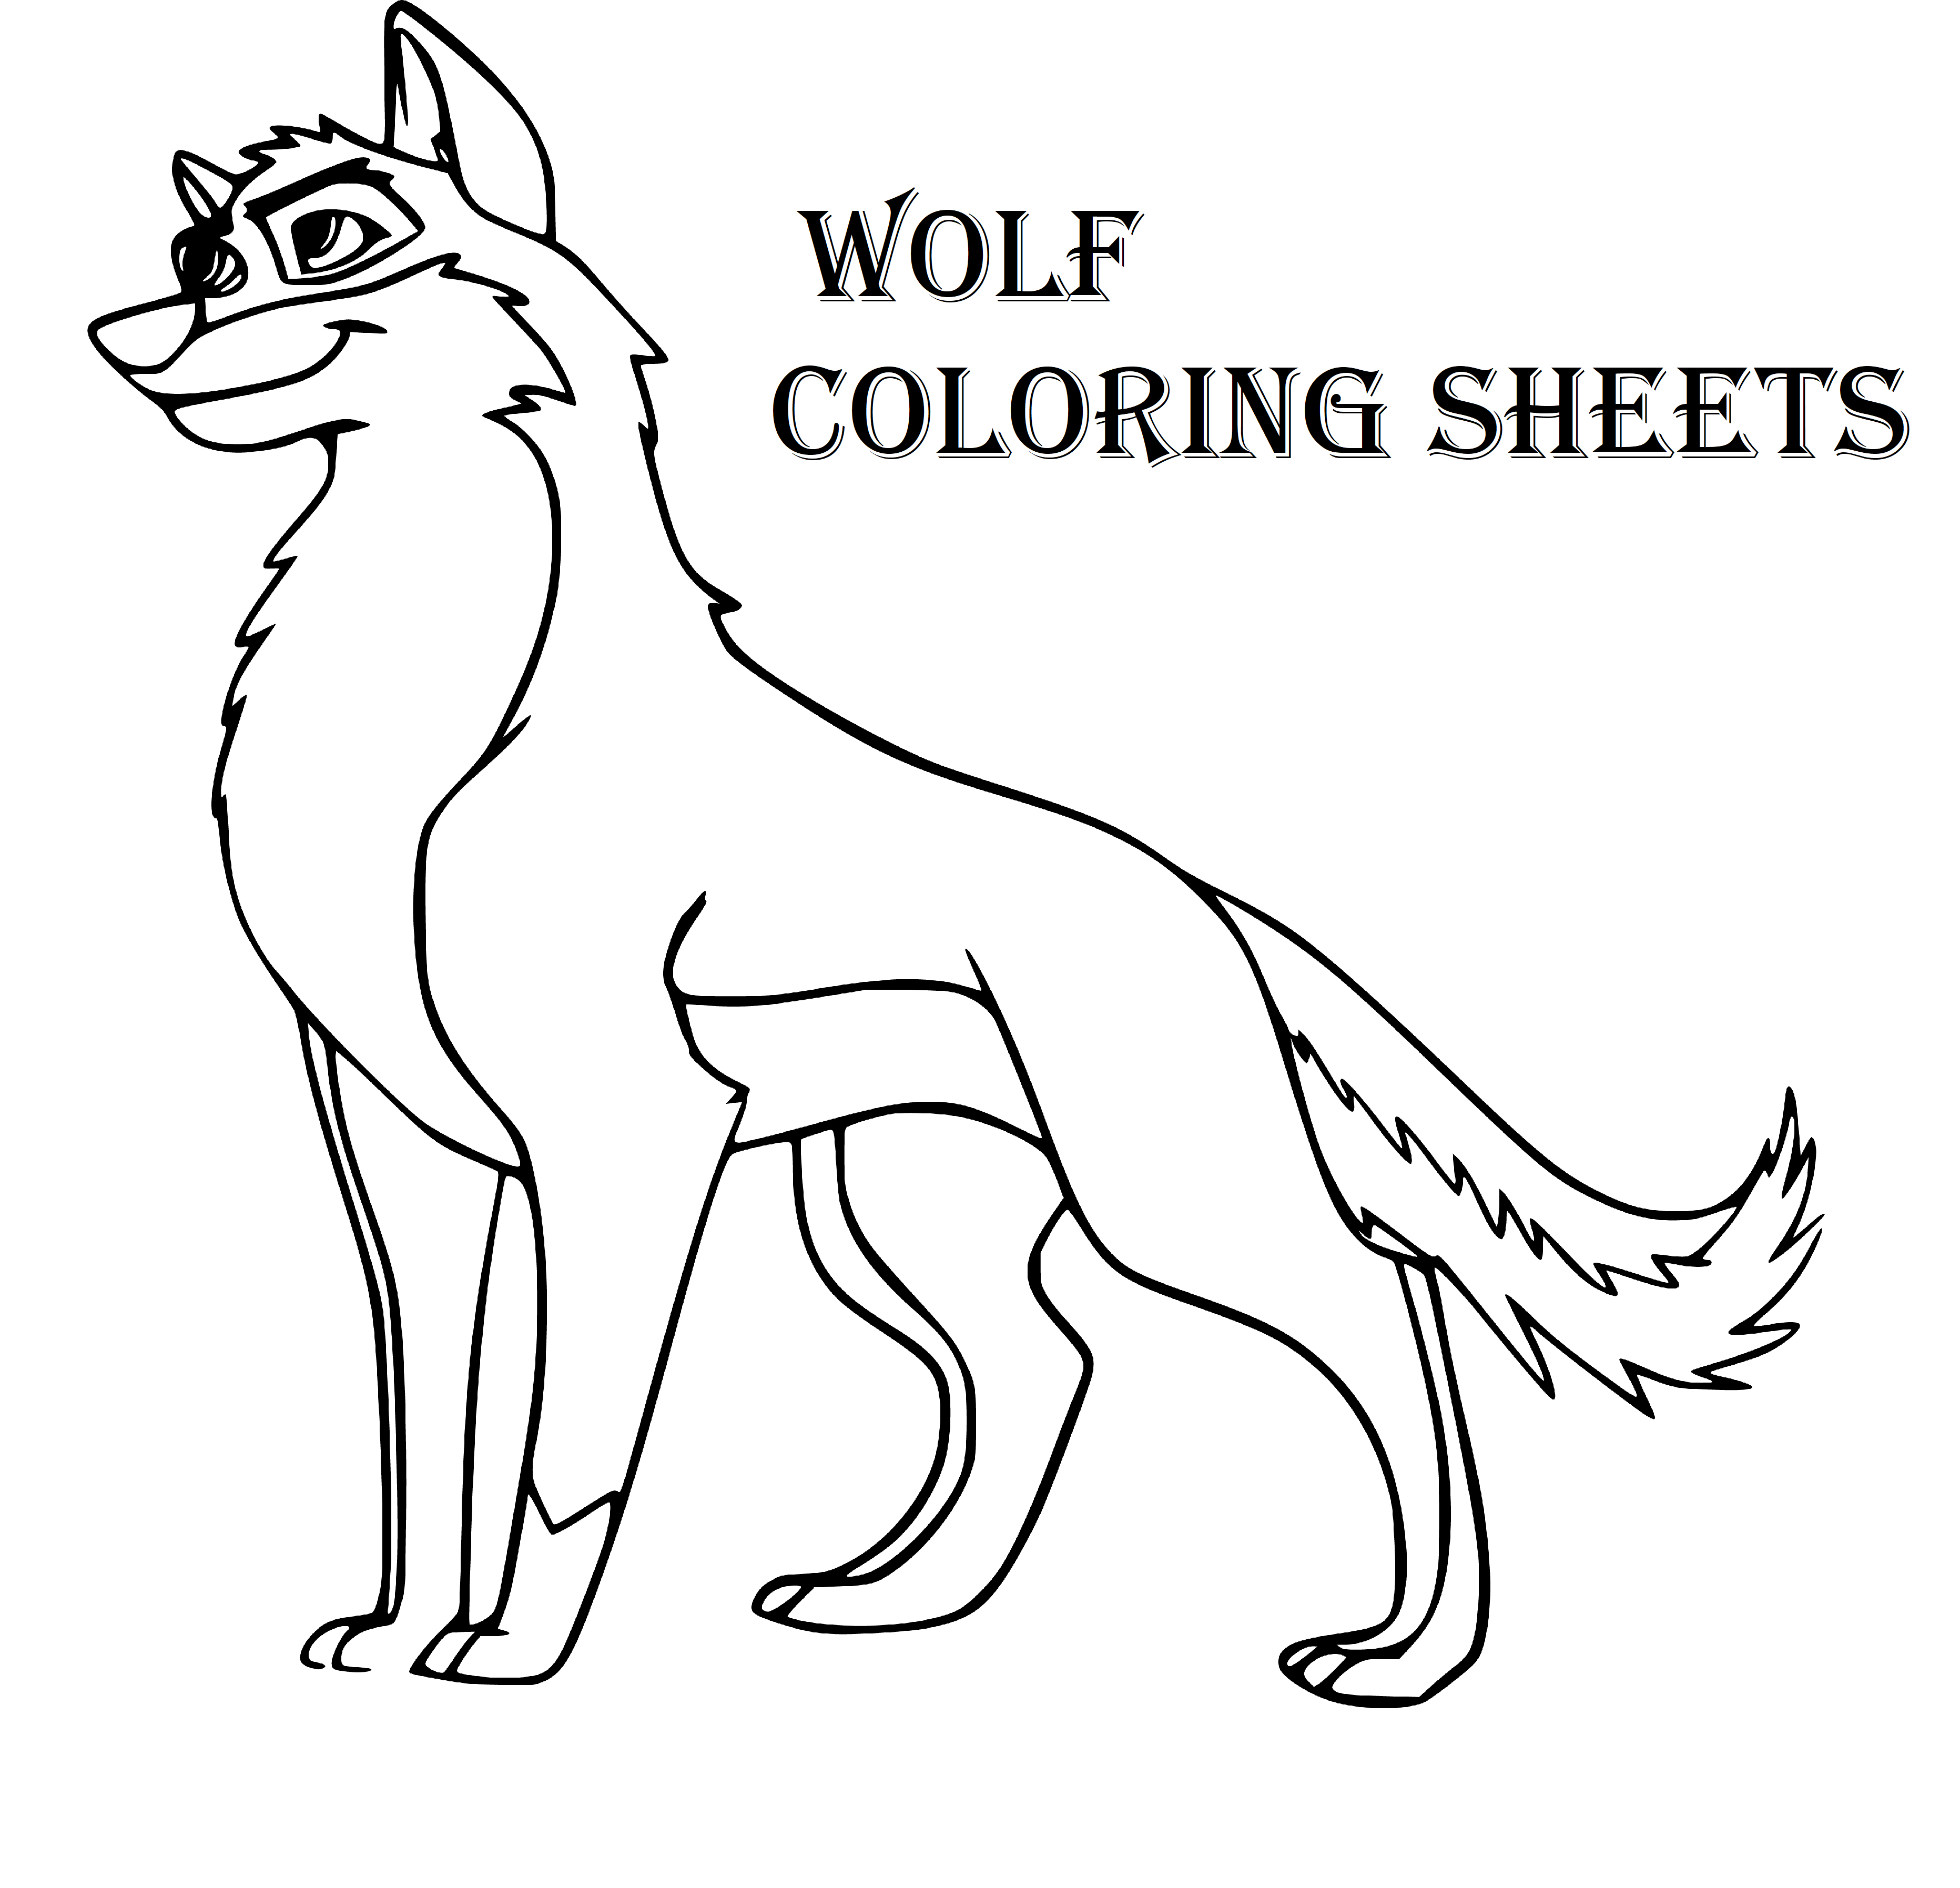 Printable Wolf drawing bw Coloring Page for kids.